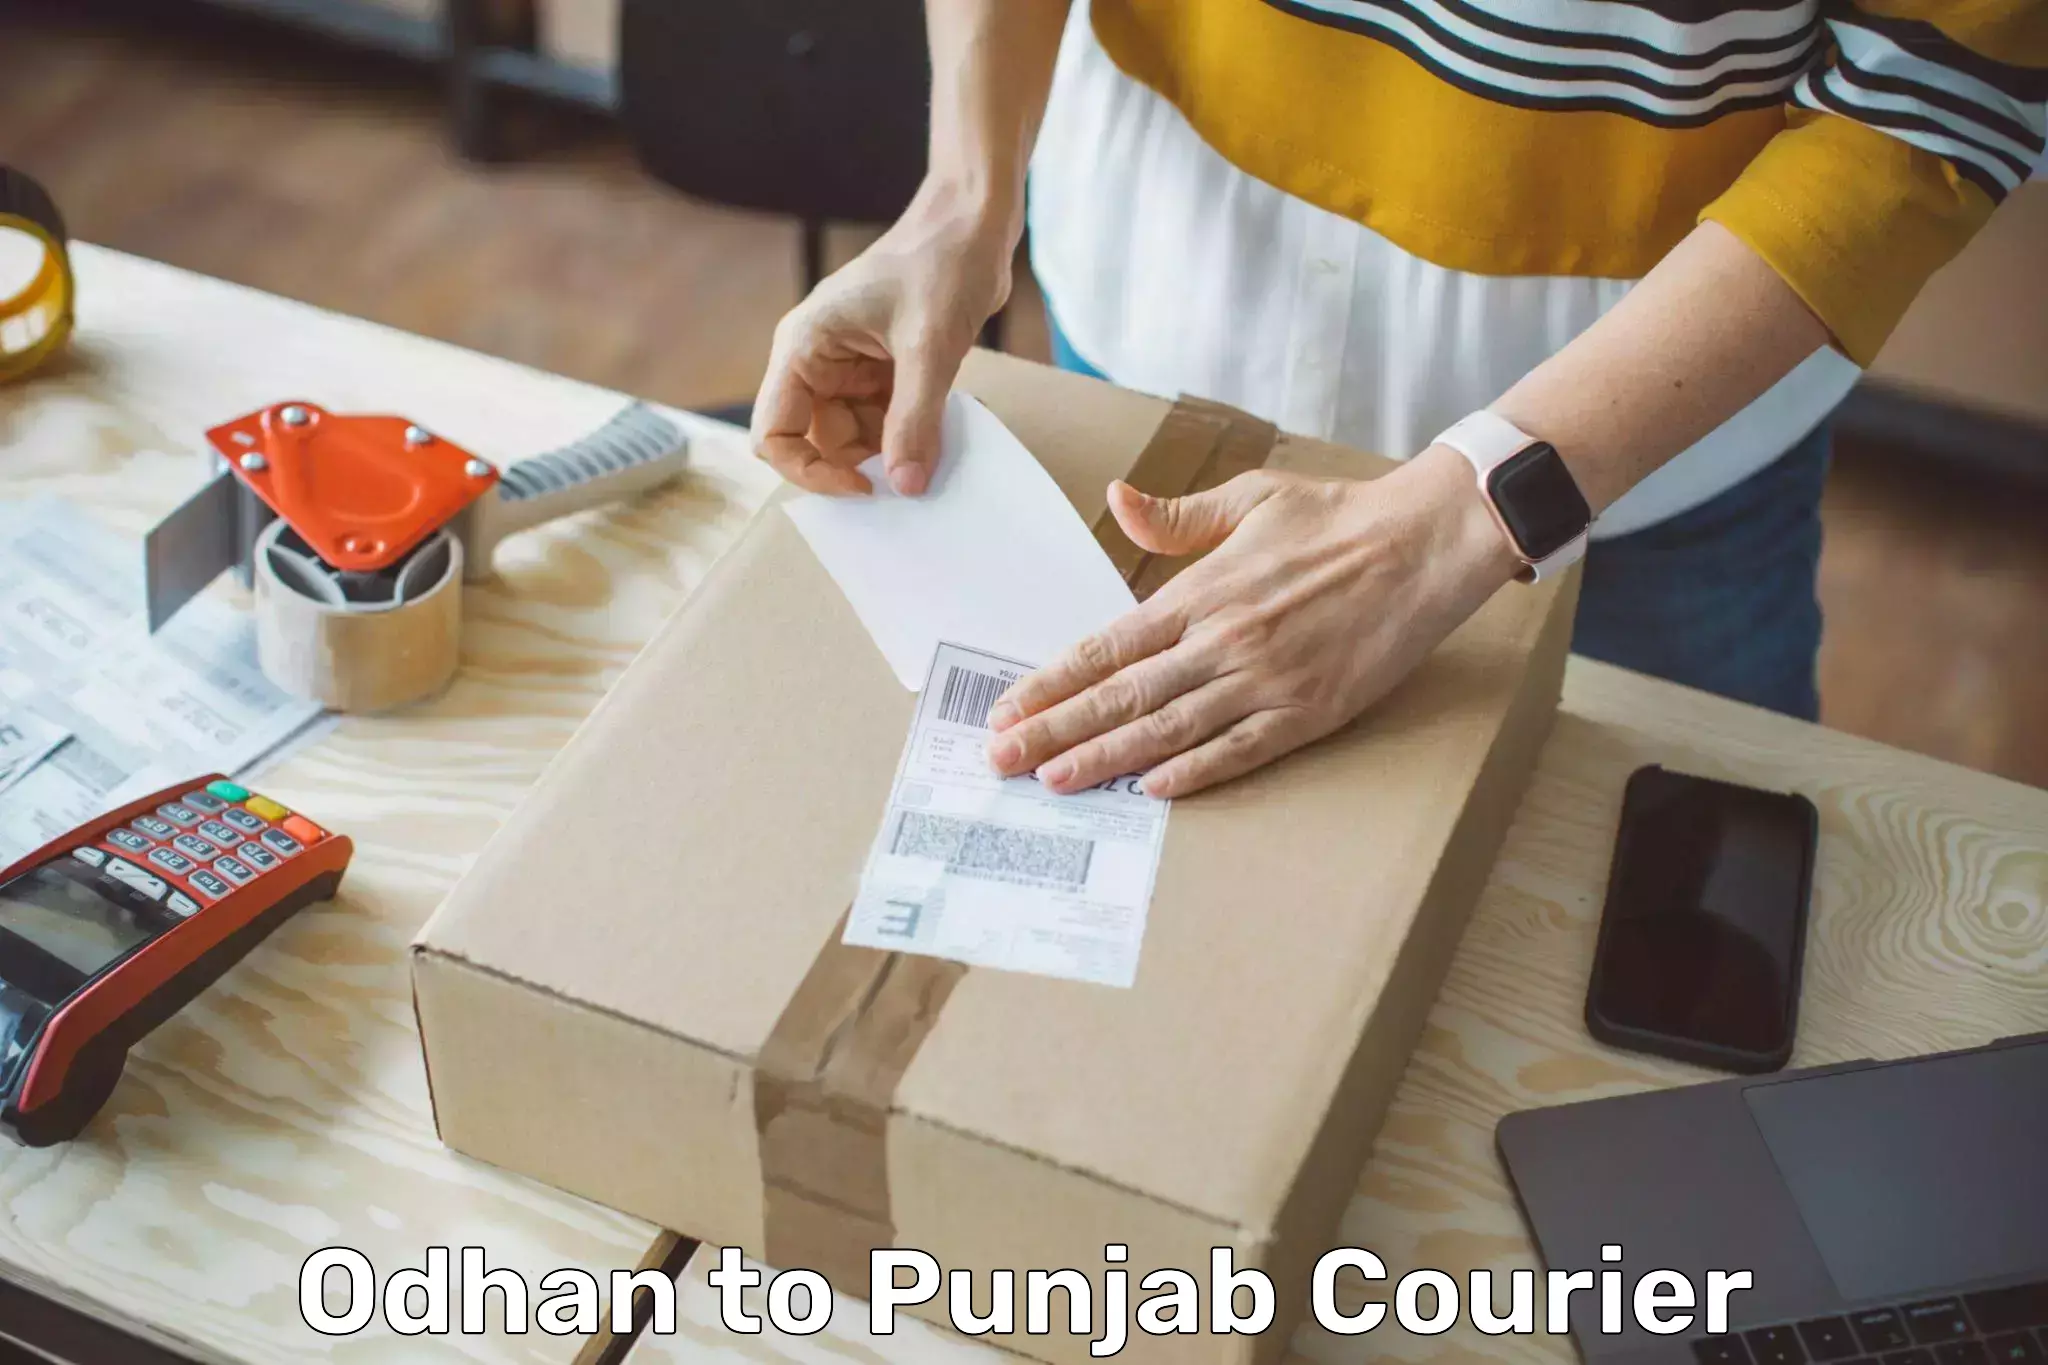 End-to-end delivery in Odhan to Punjab